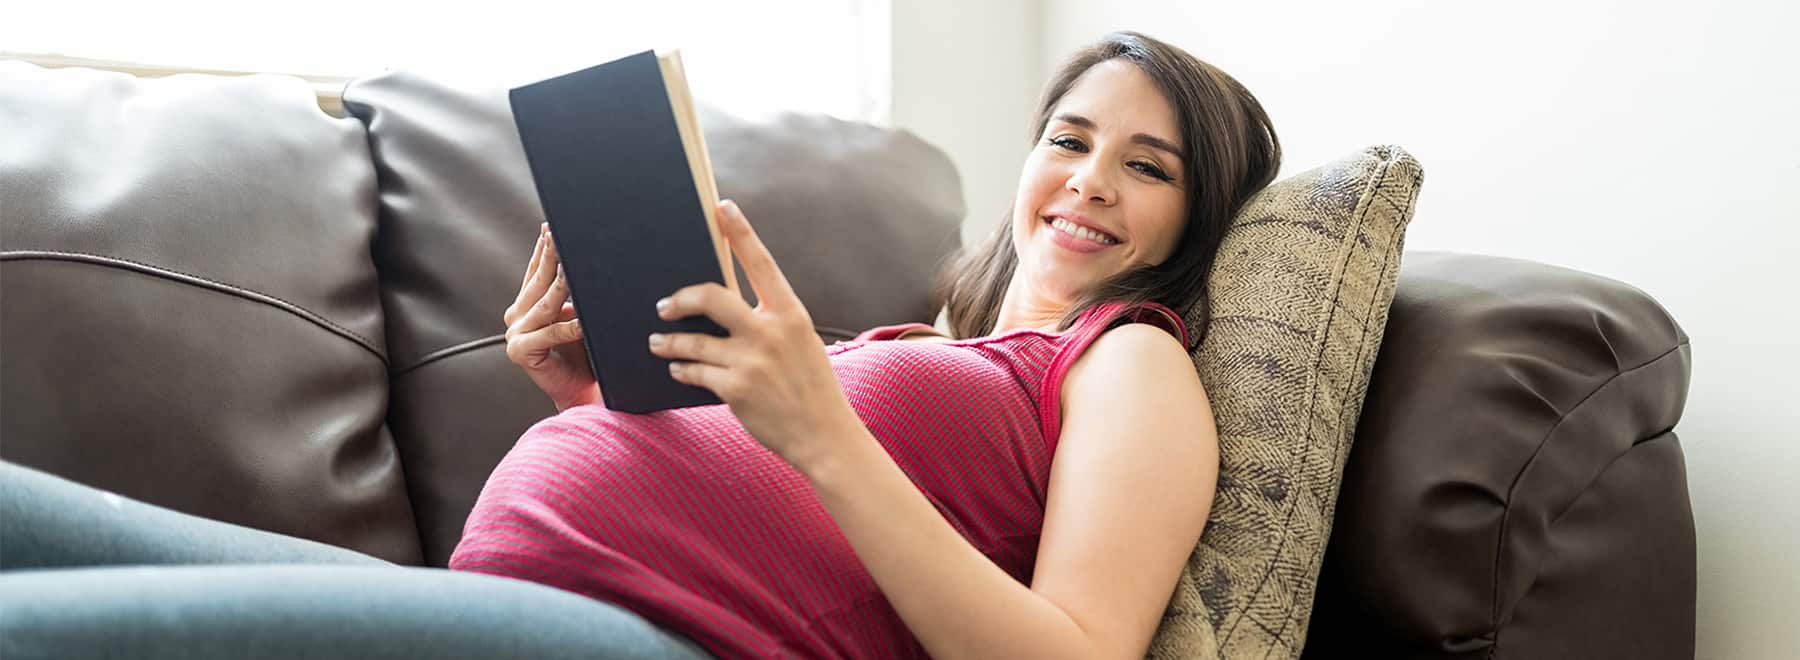 Pregnant woman reads while reclining on a couch